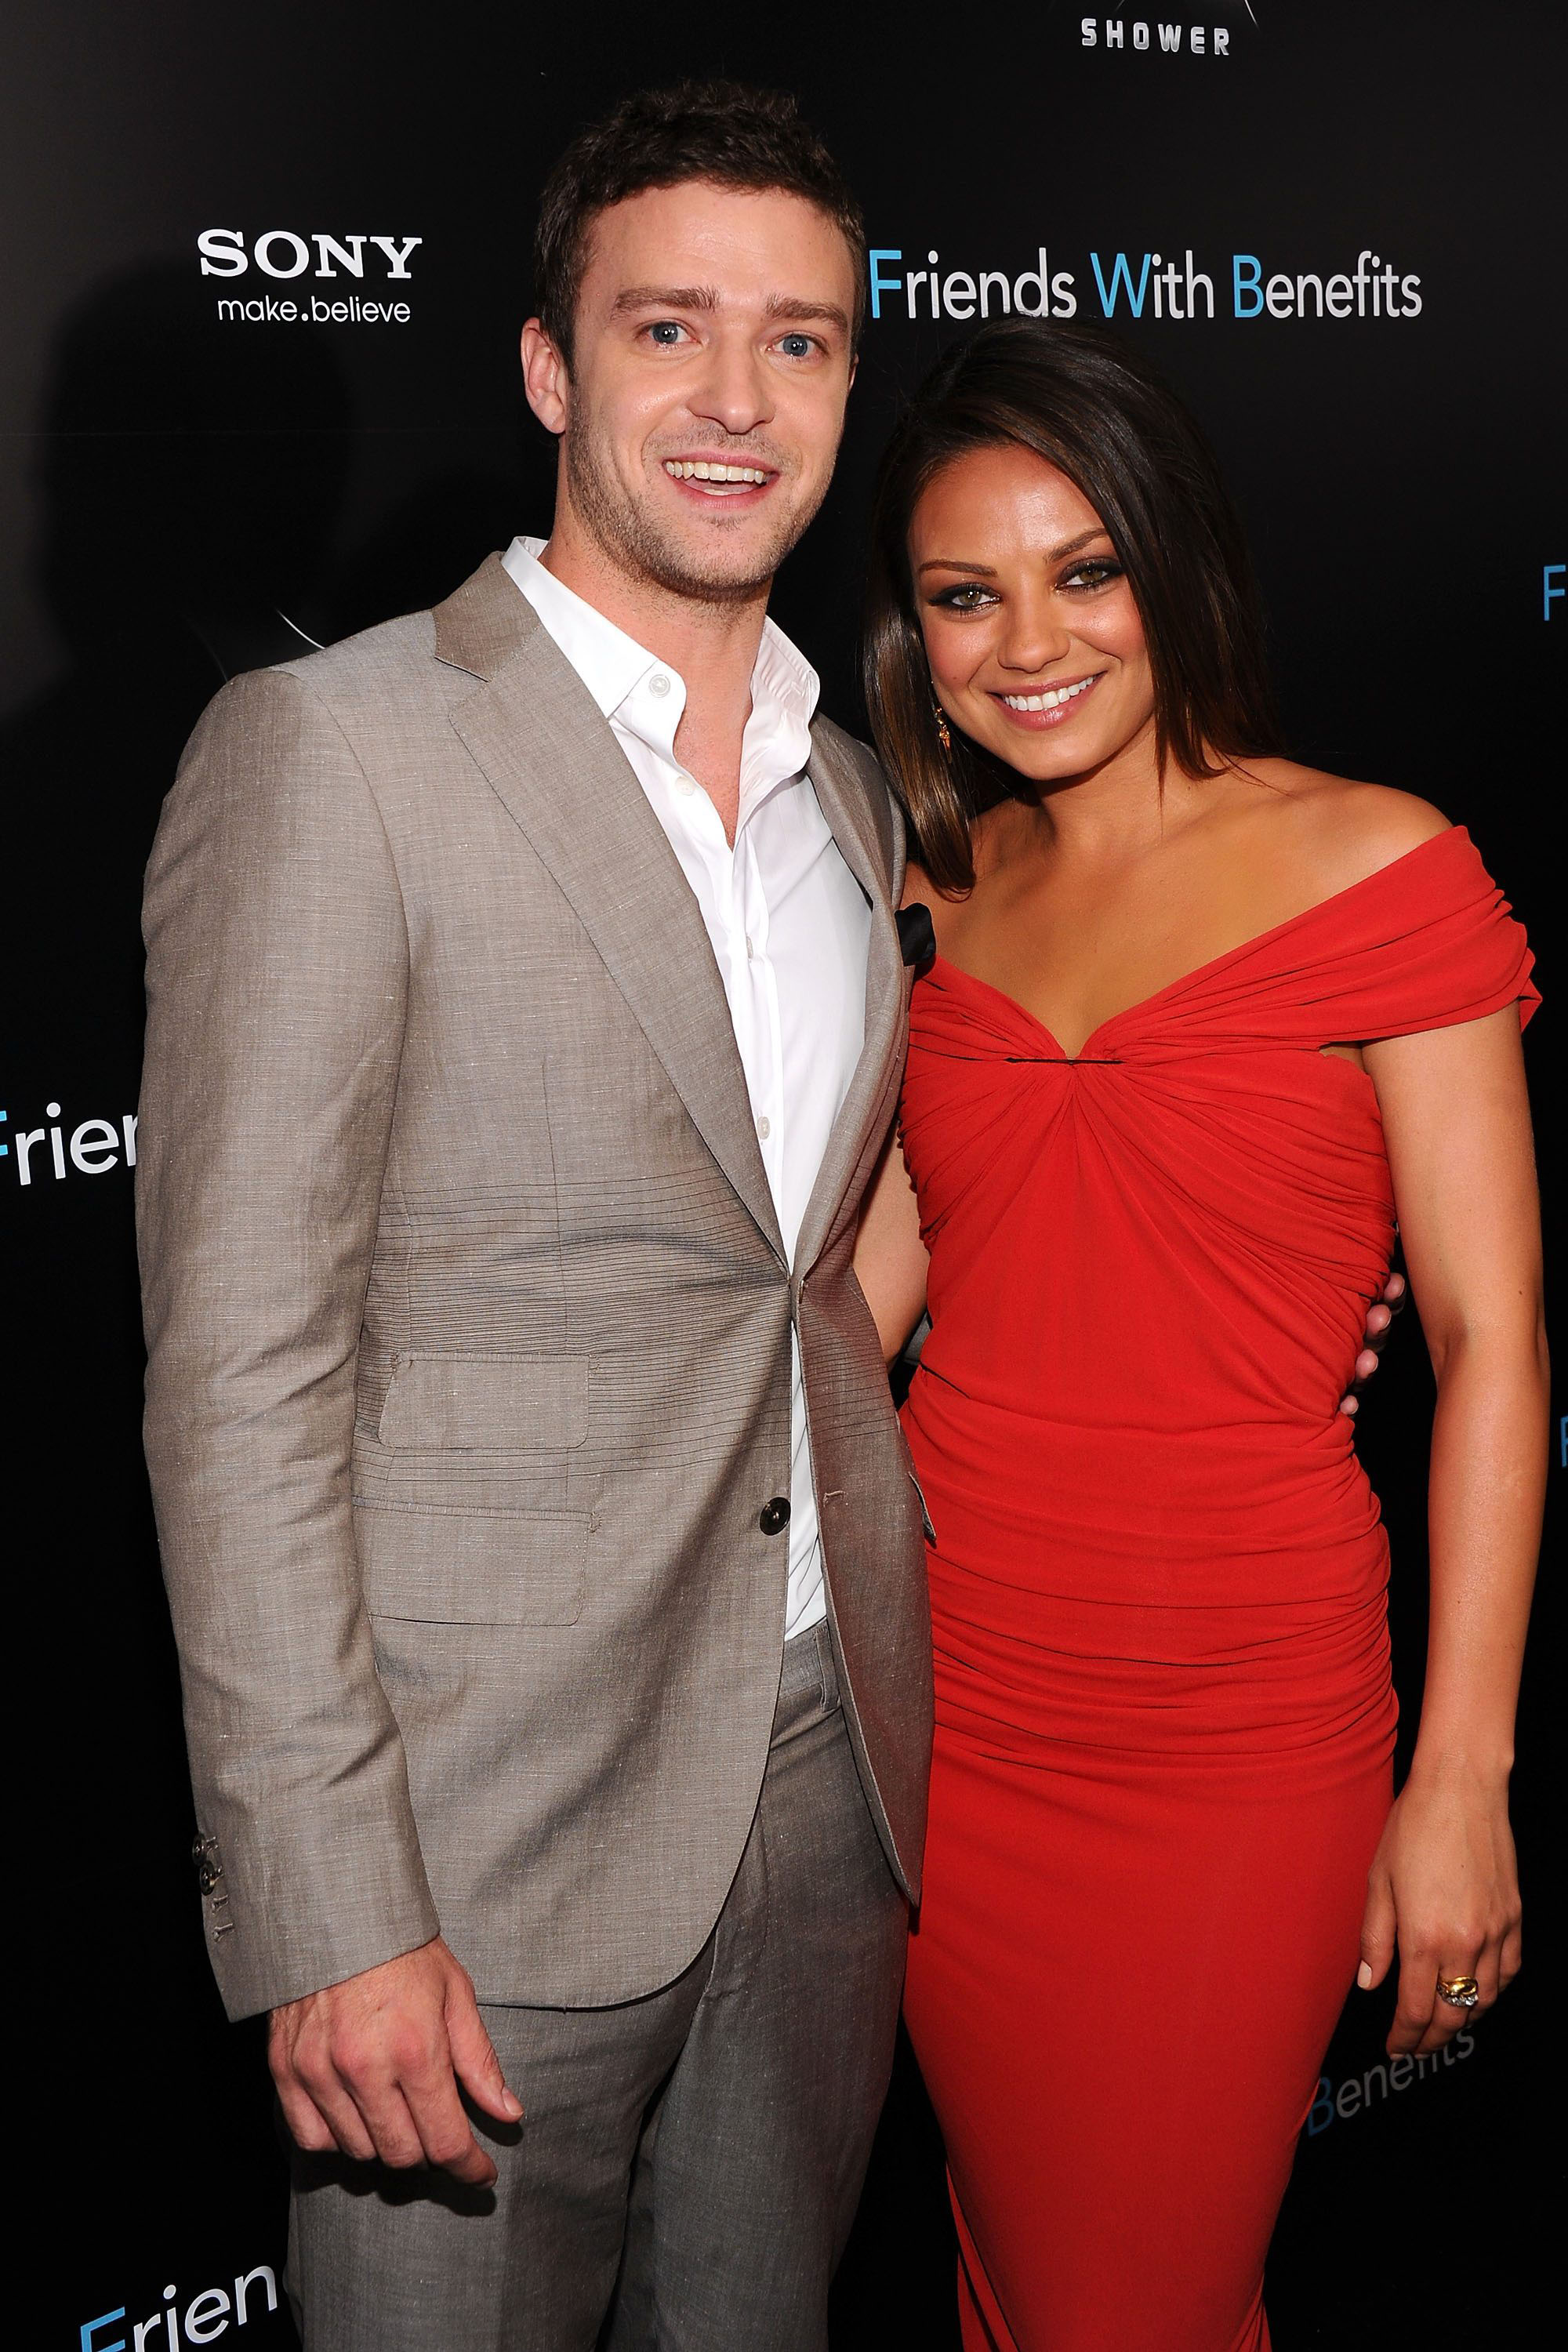 Justin Timberlake and Mila Kunis attend the Friends With Benefits New York Premiere at the Ziegfeld Theater, New York, NY  United States on 18th July 2011